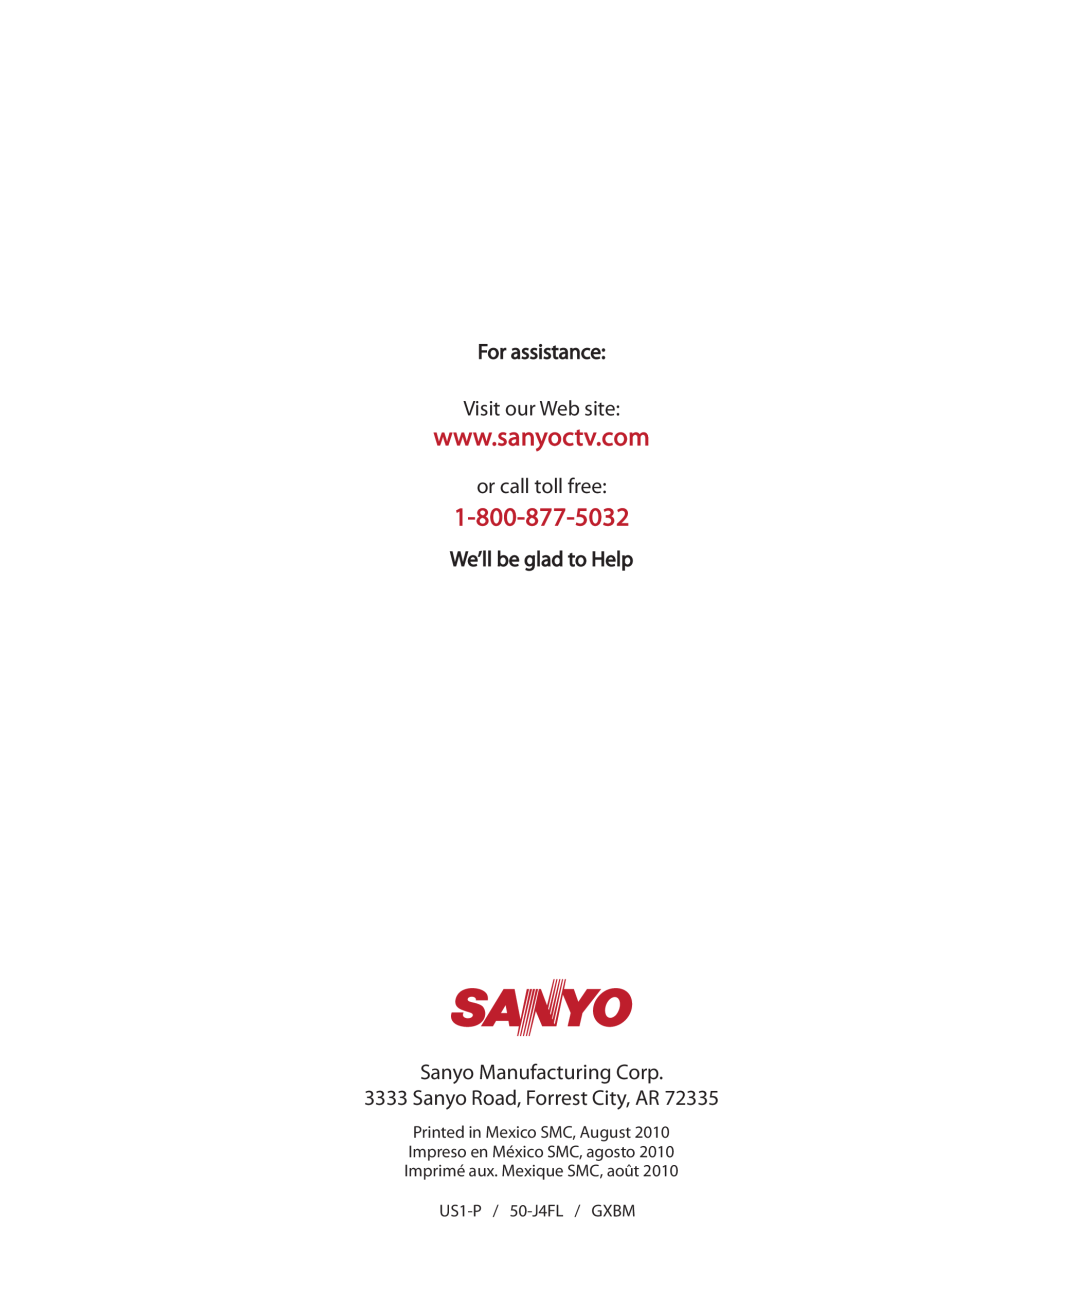 Sanyo DP50710 For assistance Visit our Web site, or call toll free, We’ll be glad to Help Sanyo Manufacturing Corp 